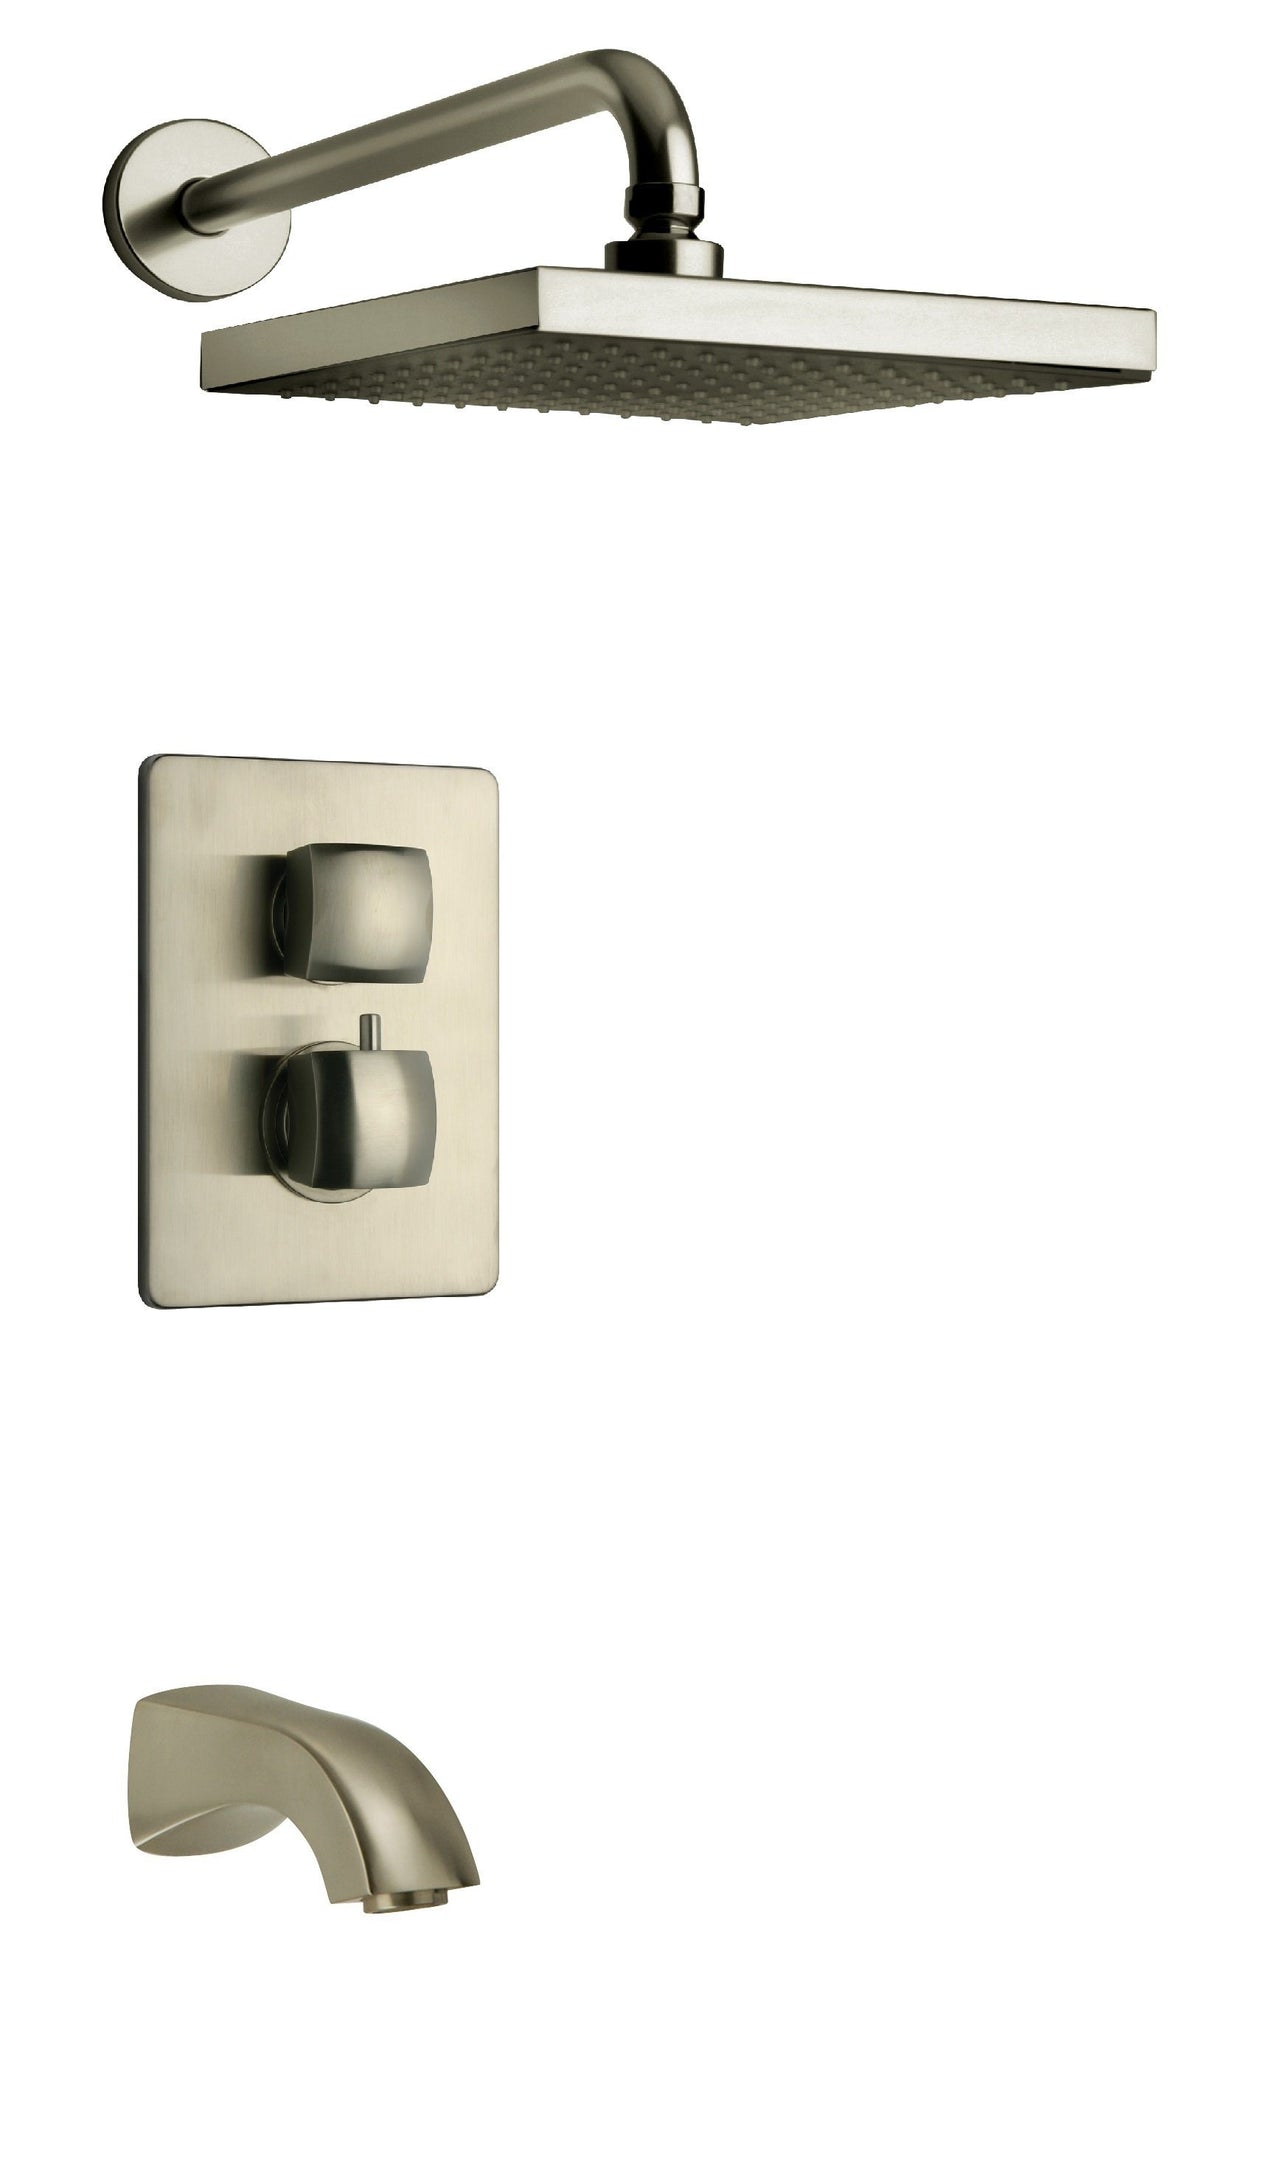 Latoscana Lady Thermostatic Valve With 2 Way Diverter Brushed Nickel bathtub and showerhead faucet systems Latoscana 